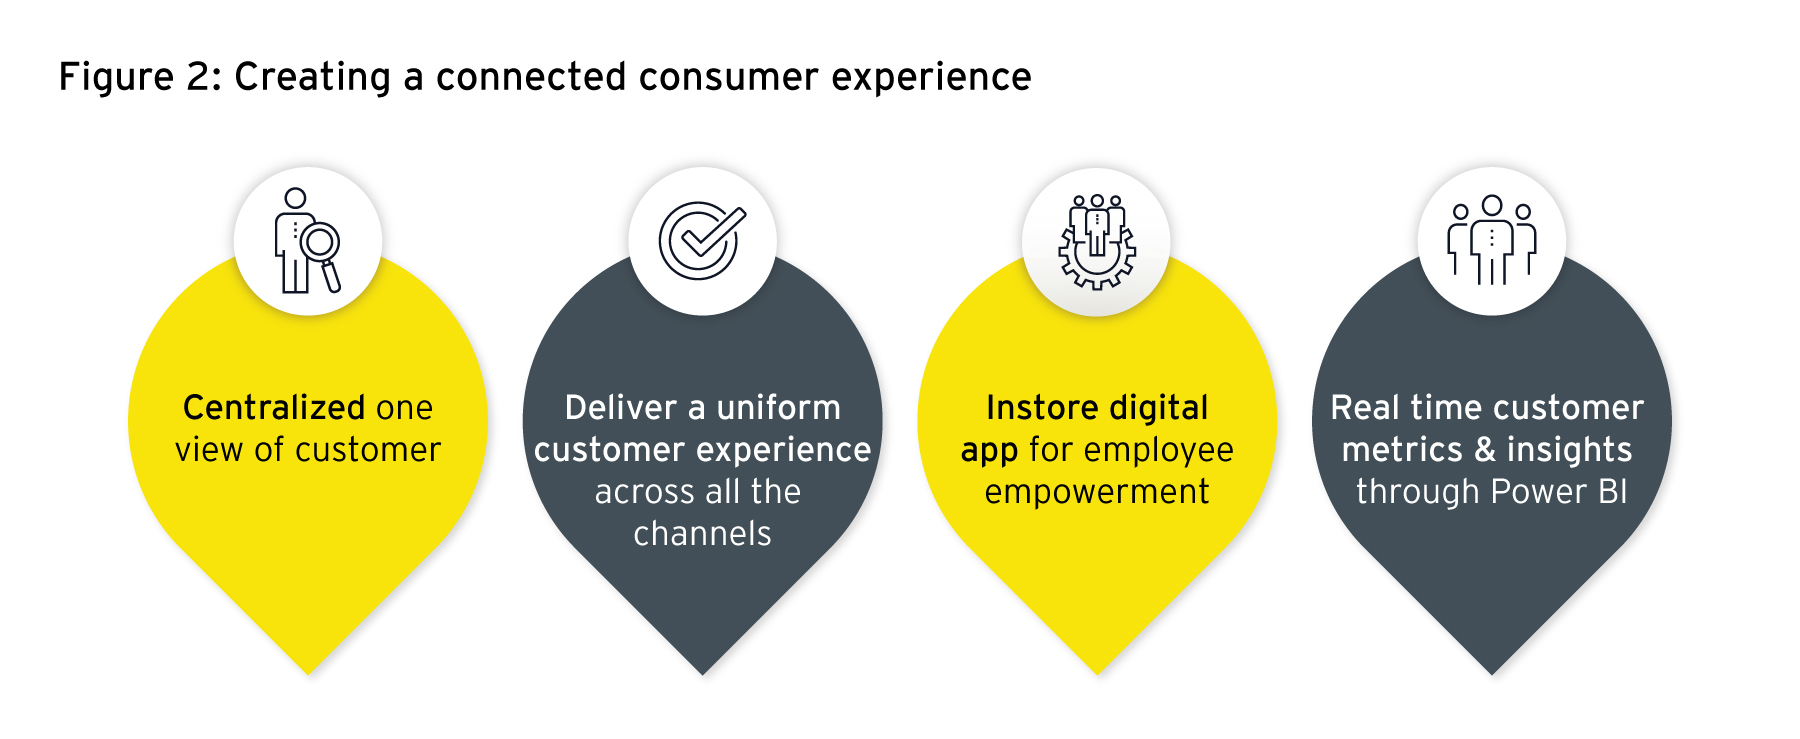 Creating a connected consumer experience